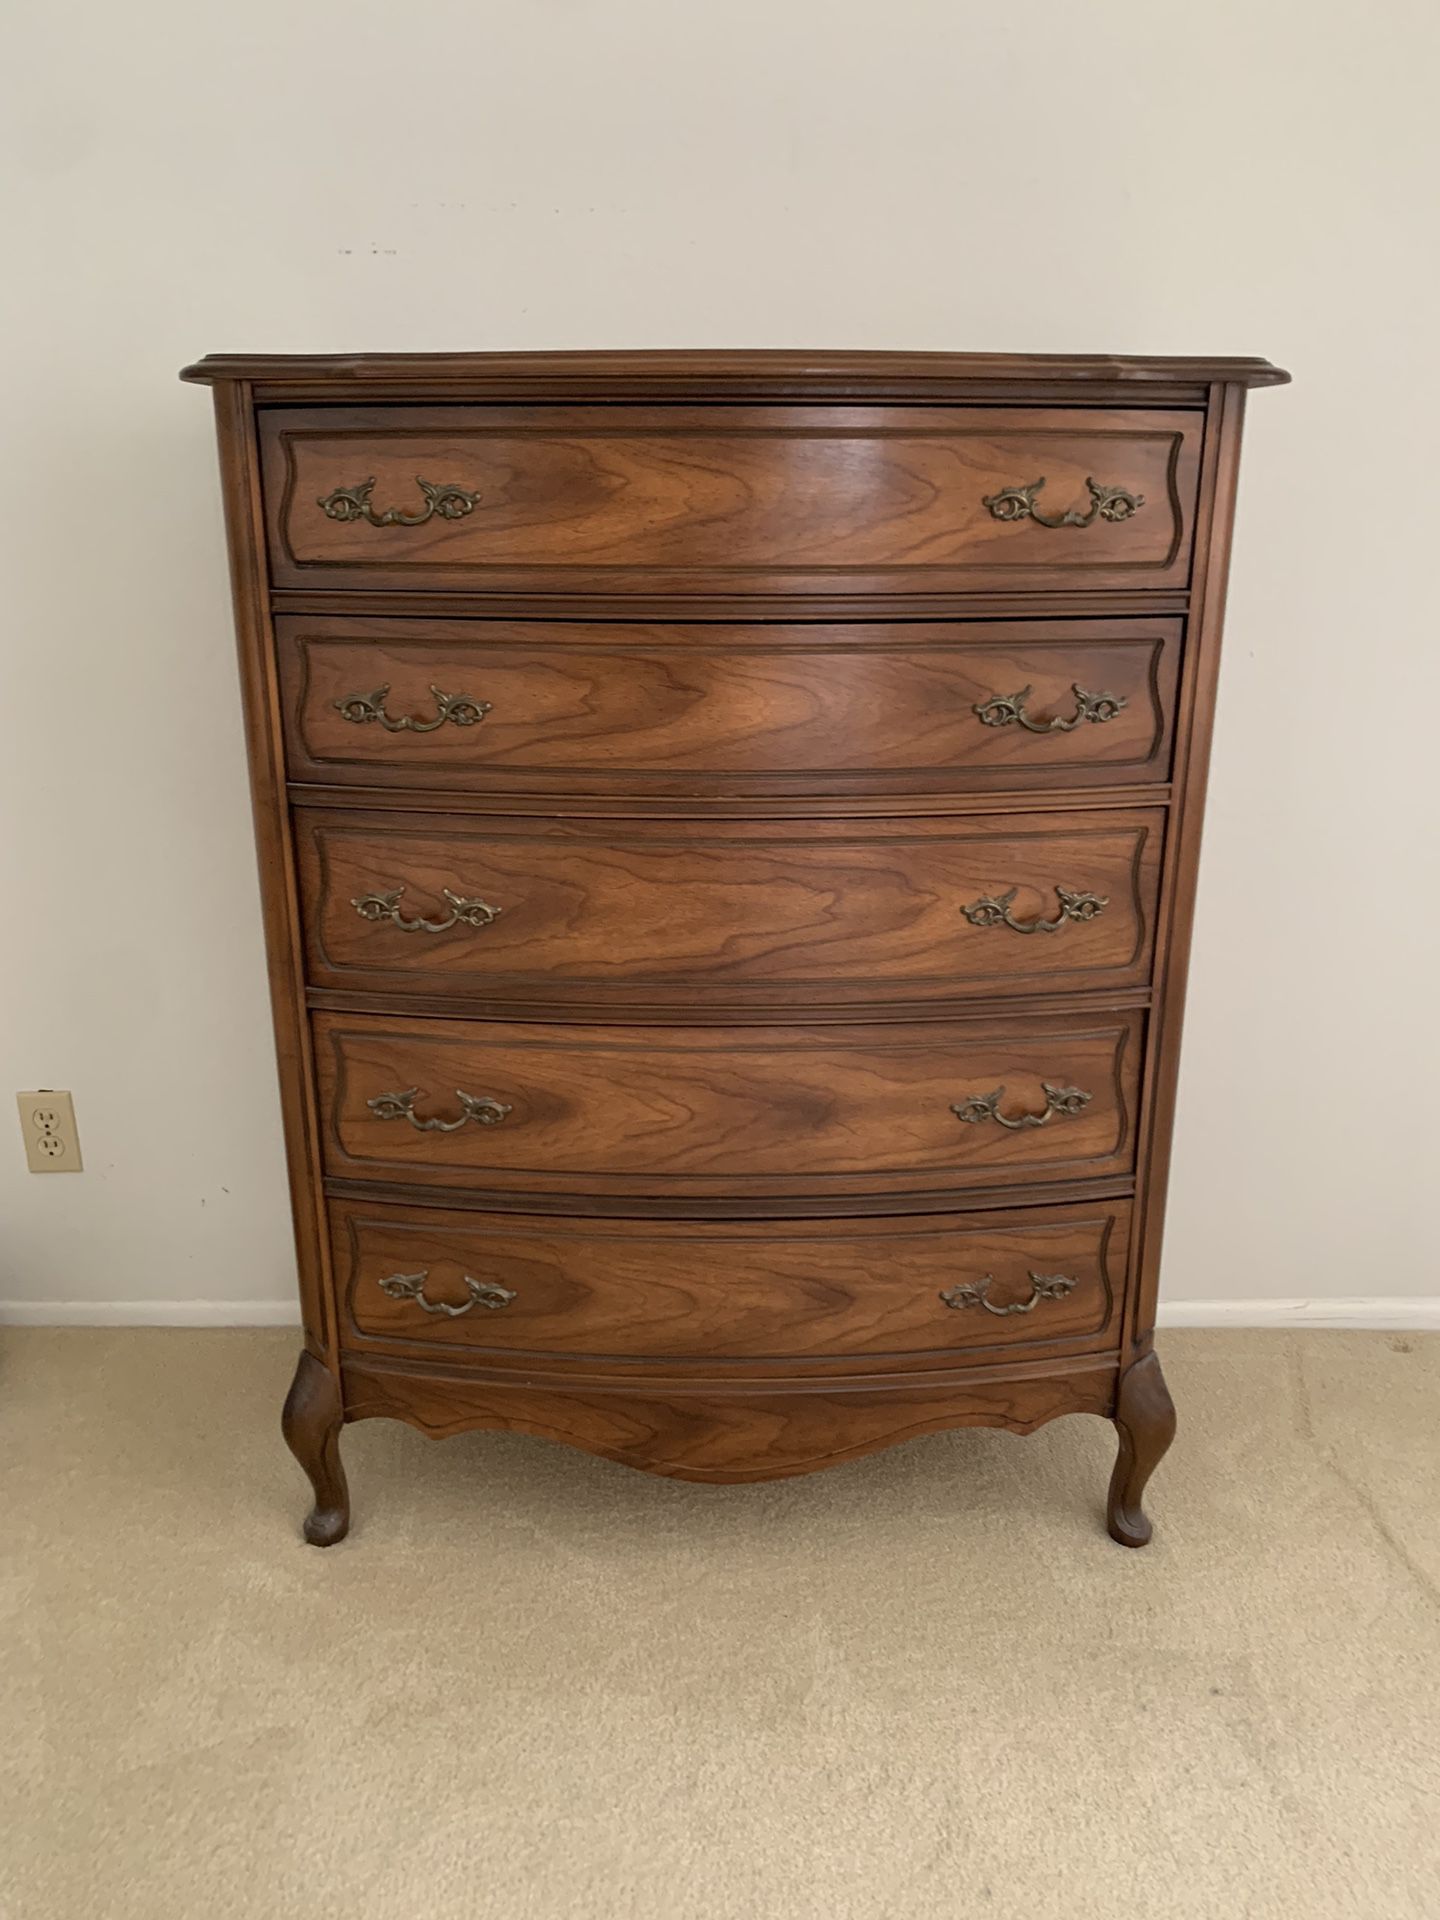 BROYHILL French Provincial Style Highboy 5 Drawer Dresser Very Good Condition 